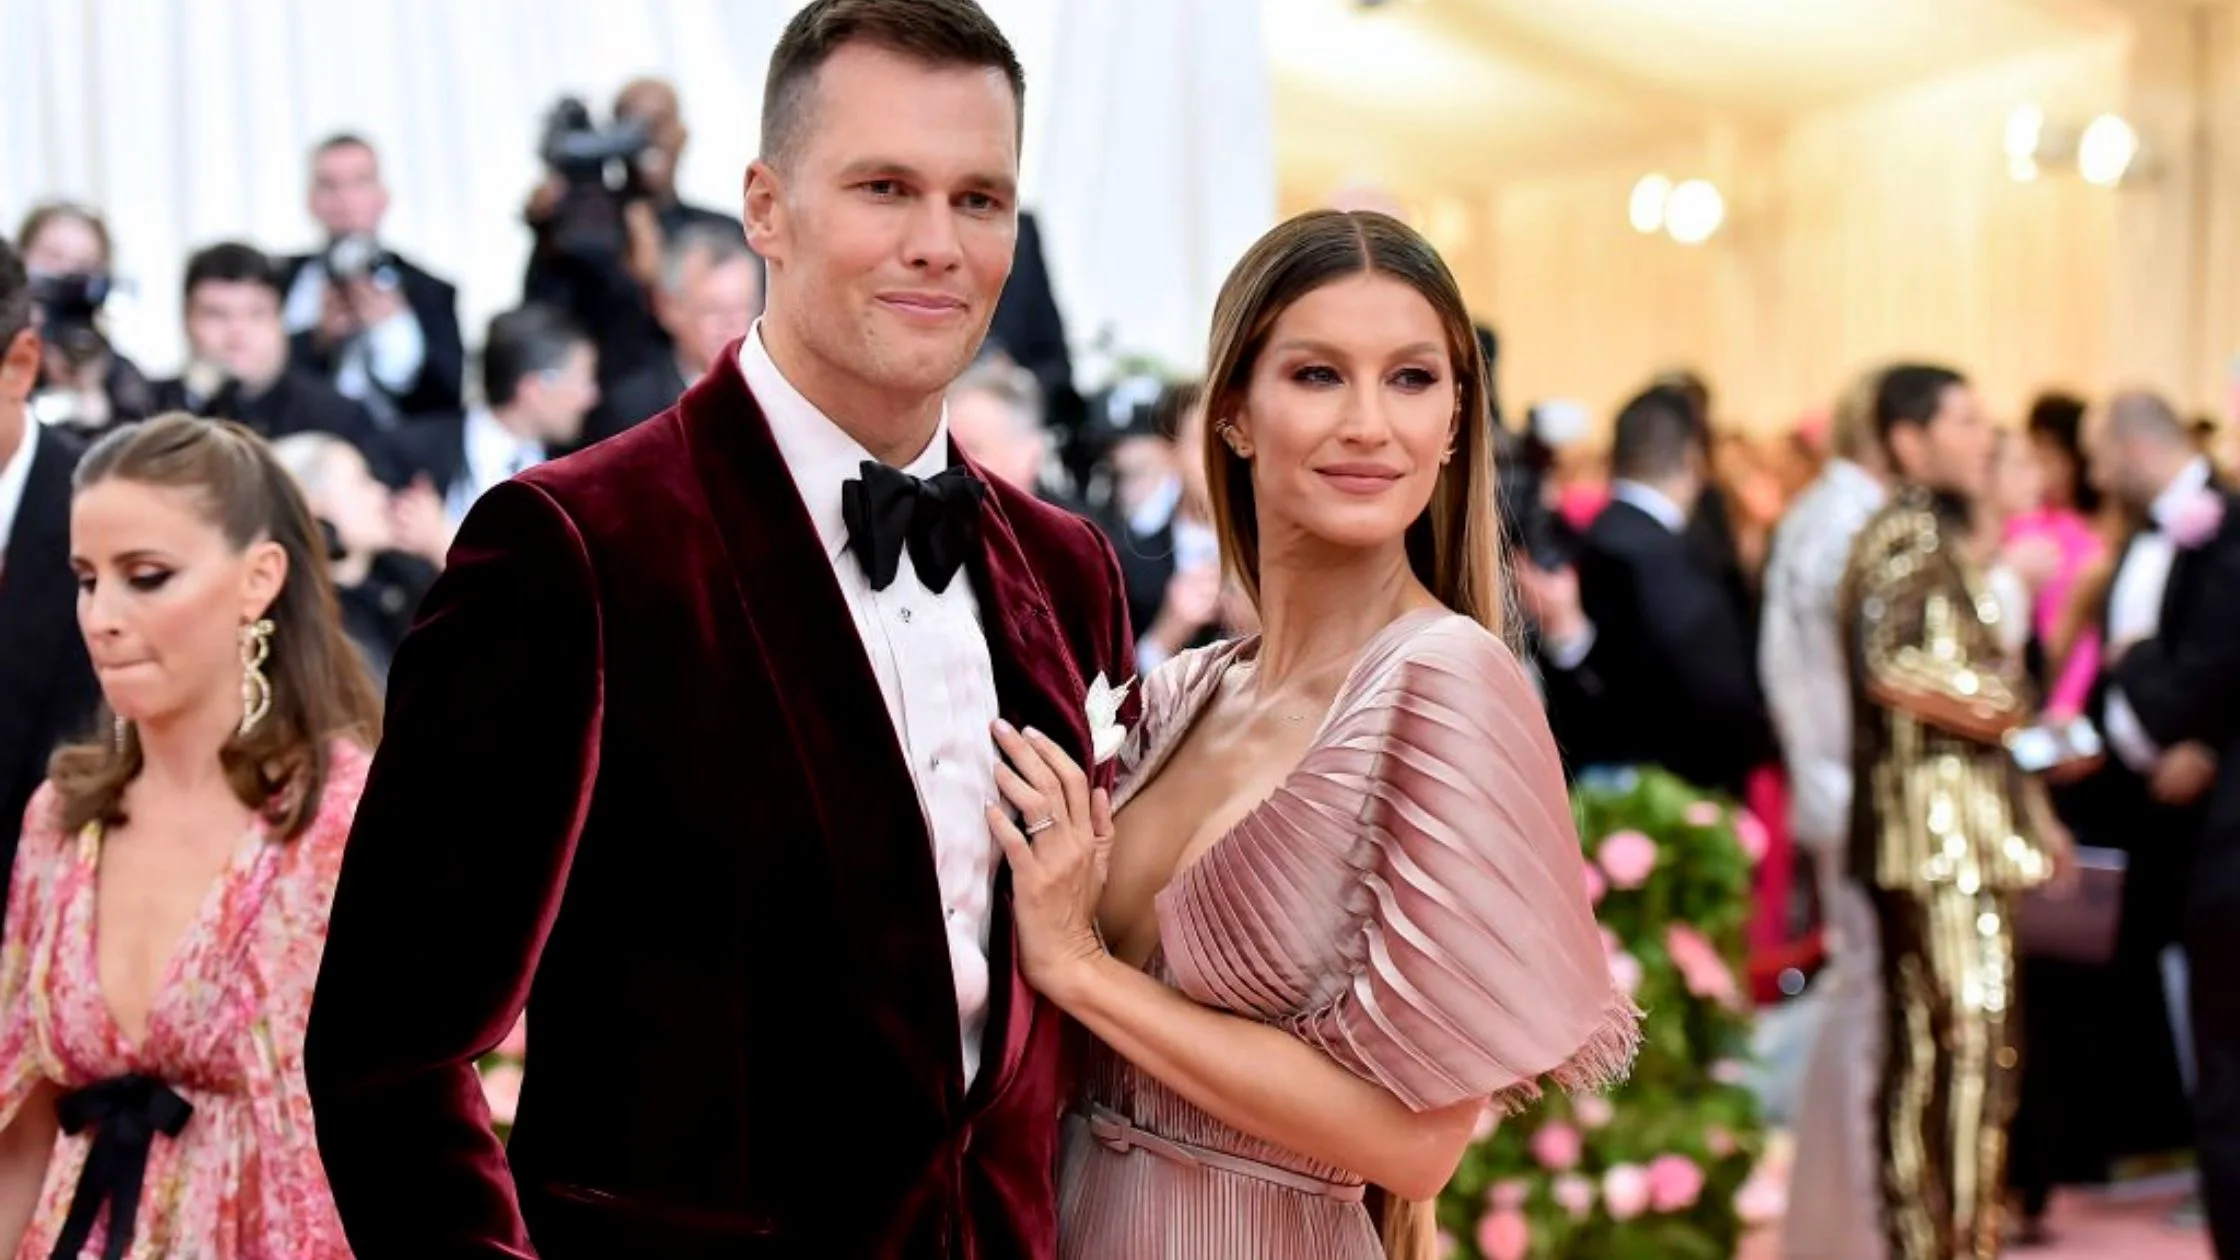 Tom Brady And Gisele Bündchen's Net Worth, Family, And Relationship